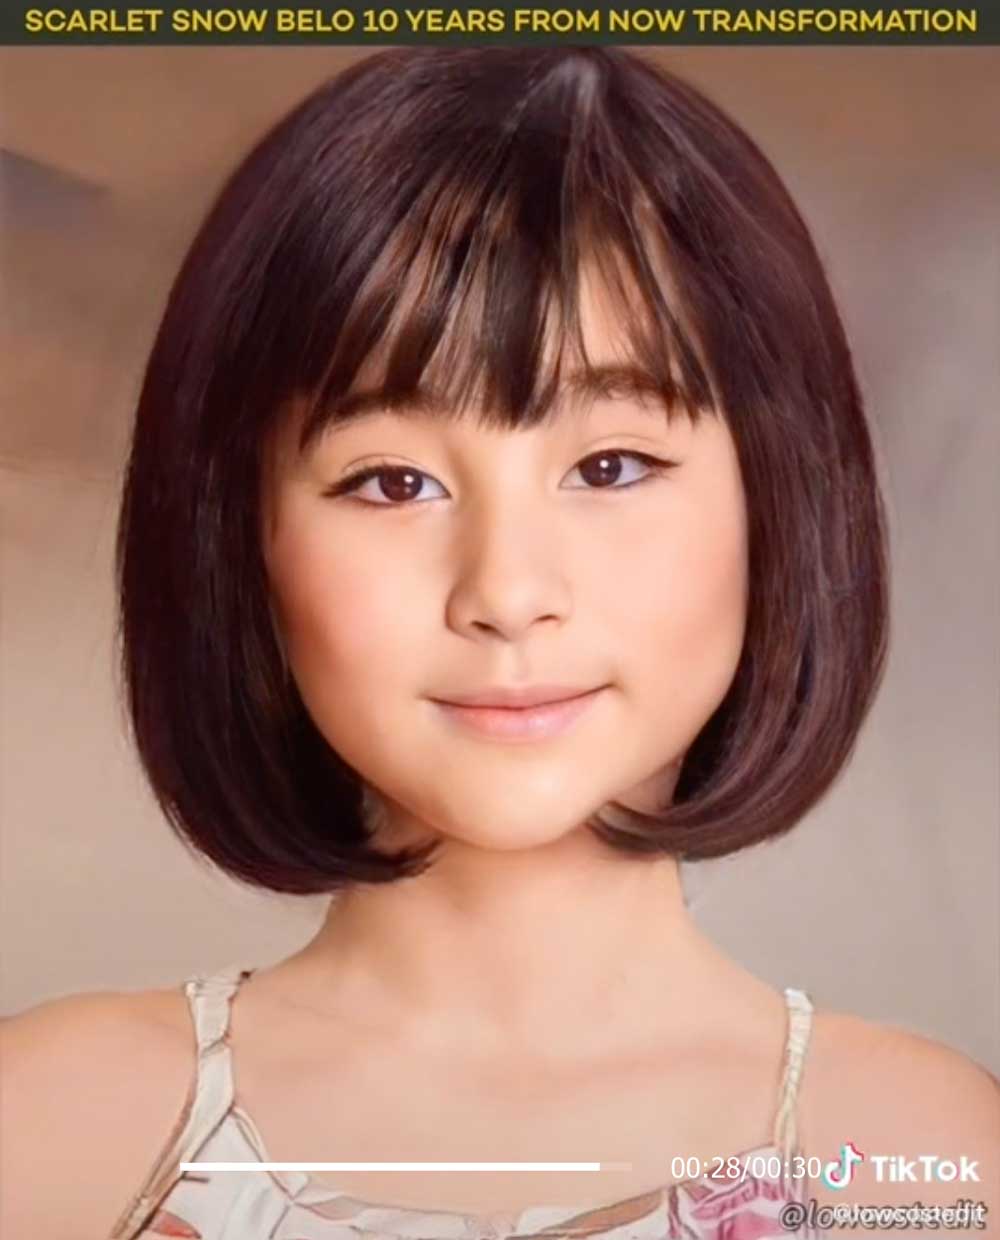 Scarlet Snow Belo, lowcostedit 10 years later